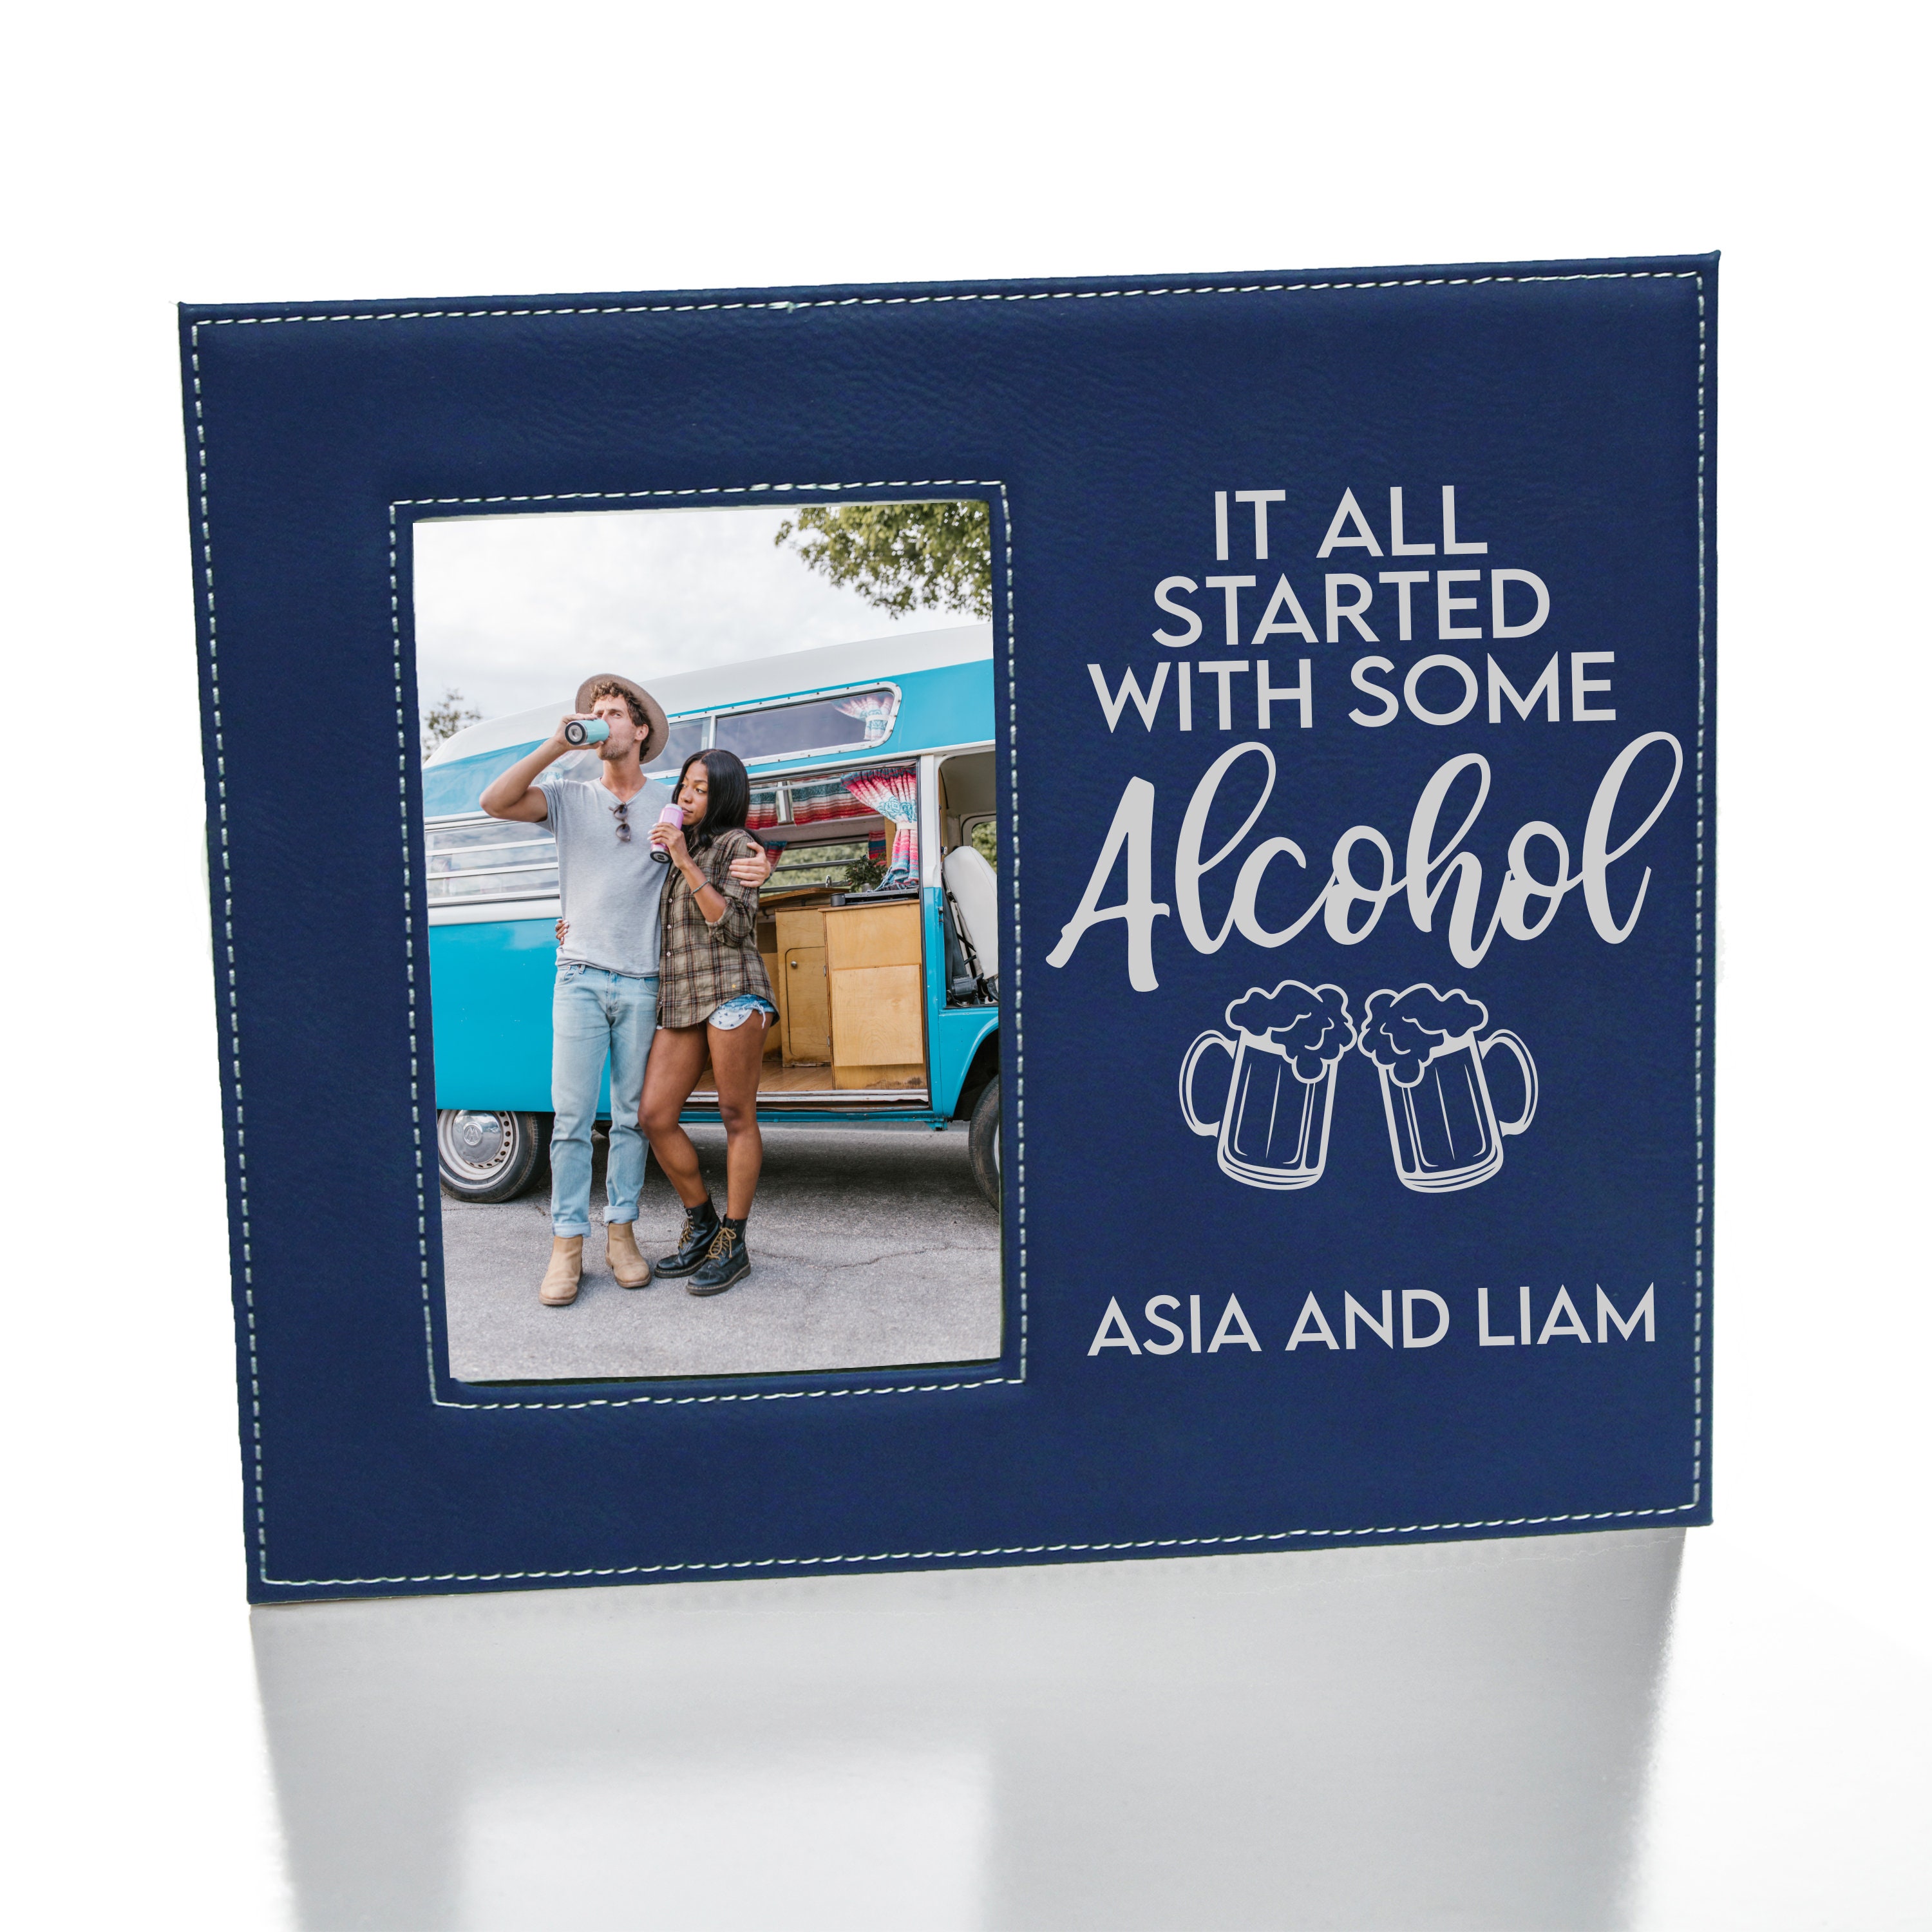 It All Started With Some Alcohol Picture Frame Boyfriend Picture Frame Gift  Met at a Bar Couple Gift Birthday Gift for Boyfriend 